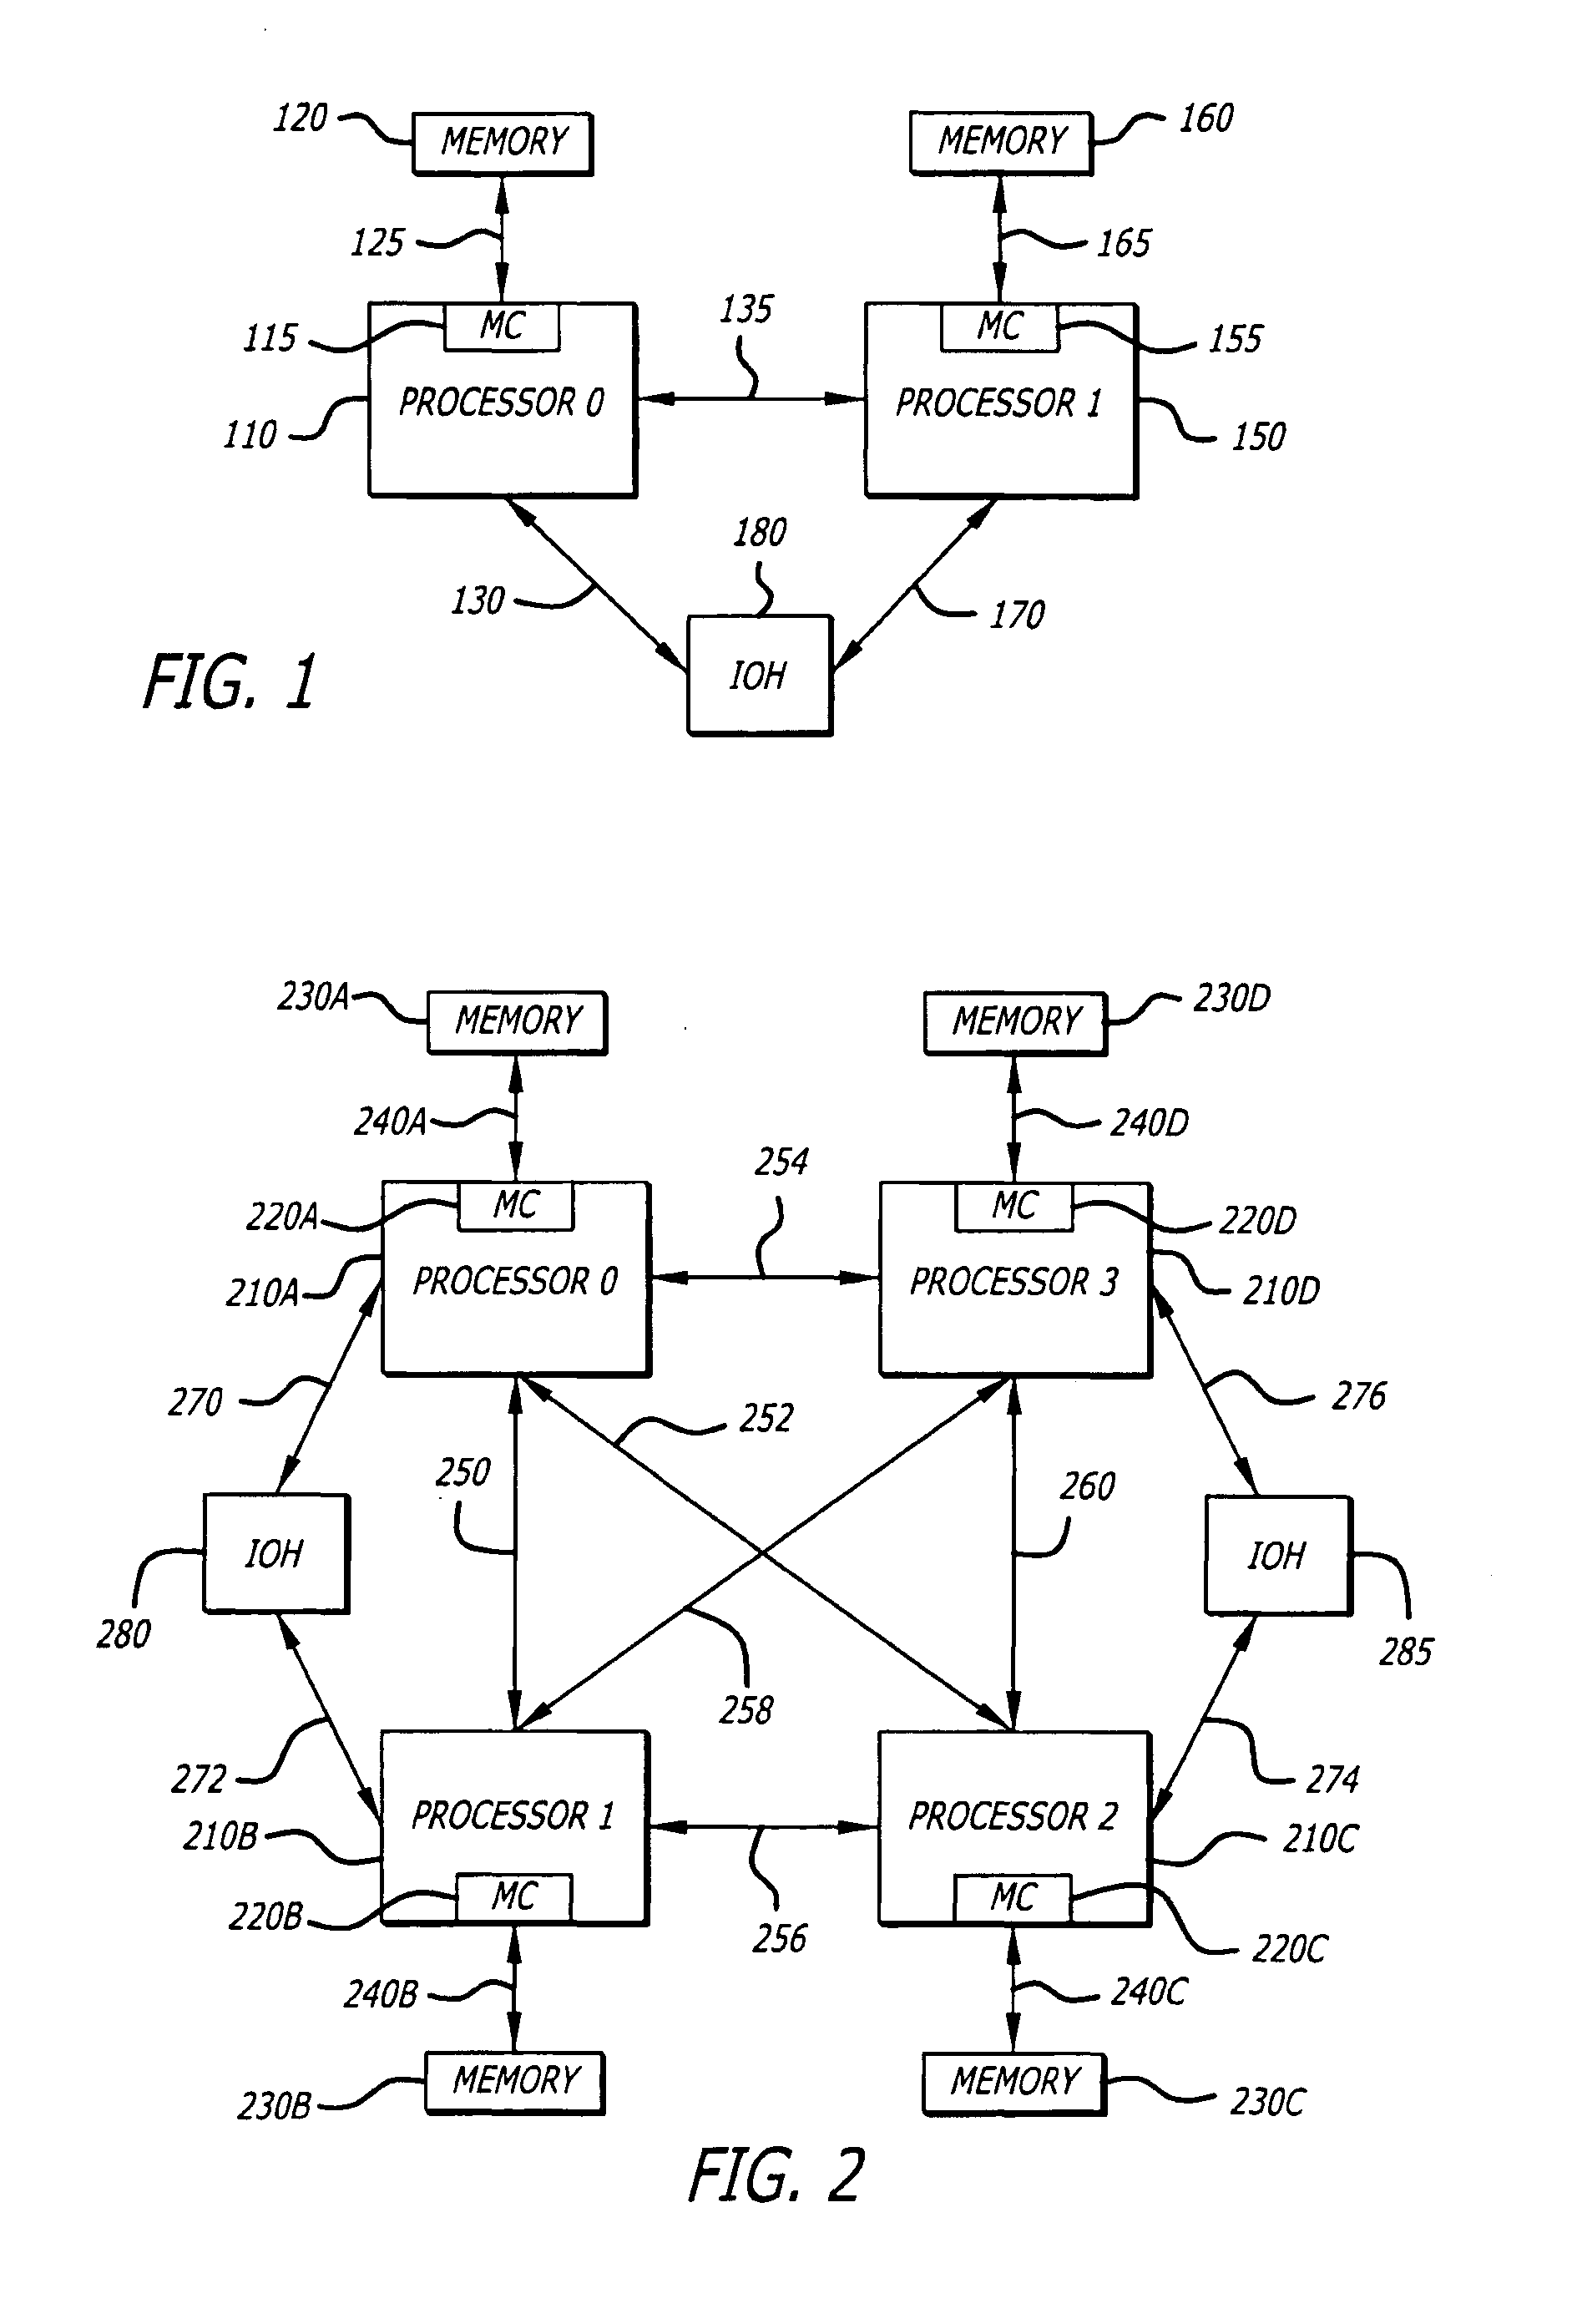 Method, System and Apparatus for Power Management of a Link Interconnect